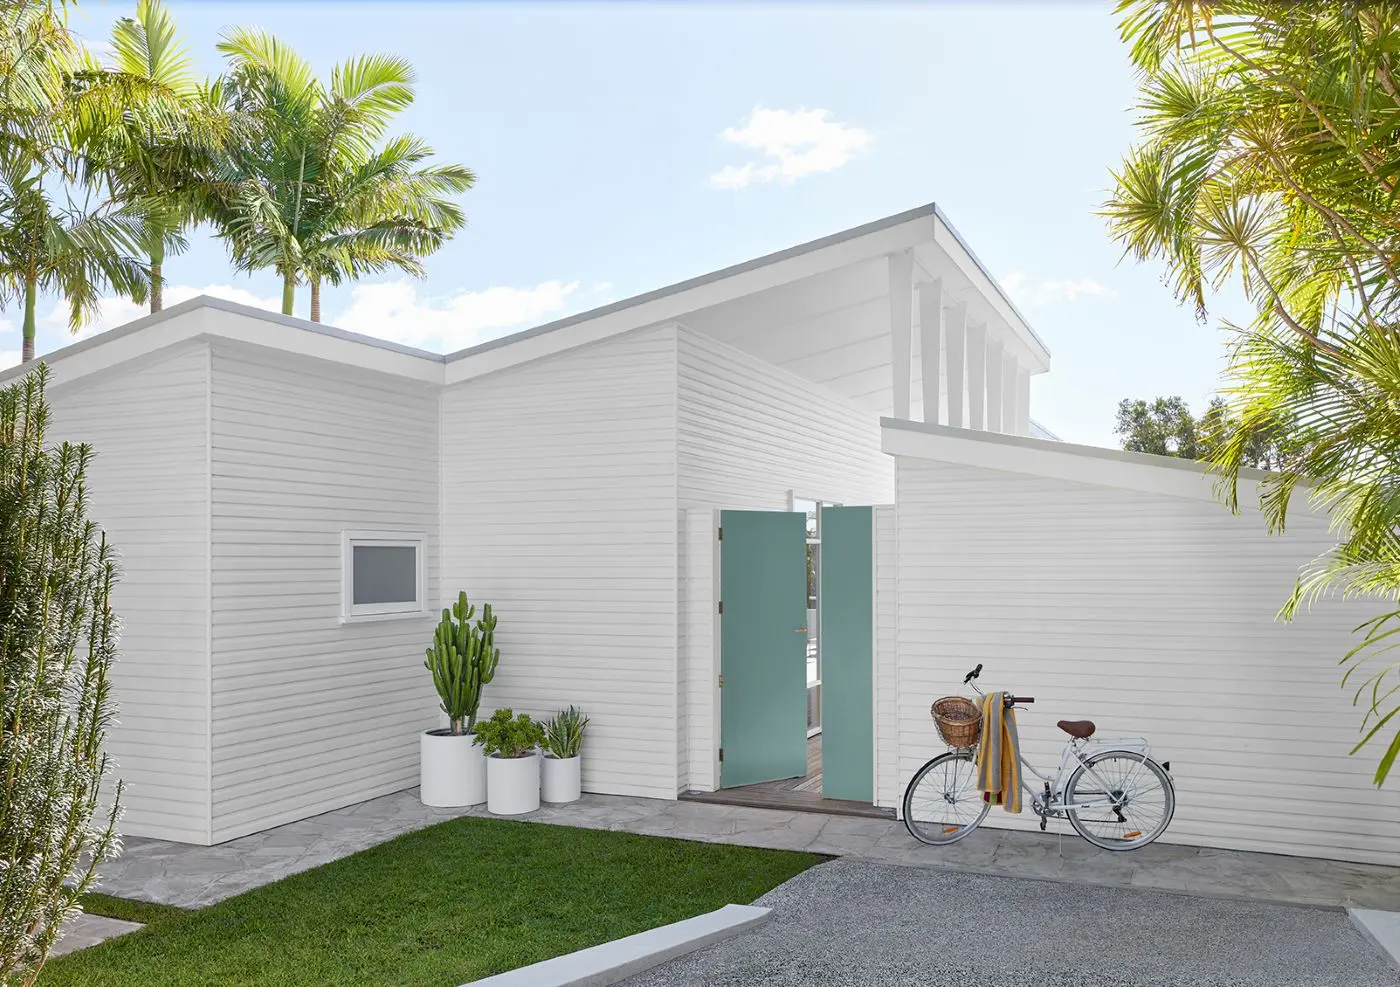 Coastal home exterior with white weatherboards turquoise front door and palm trees